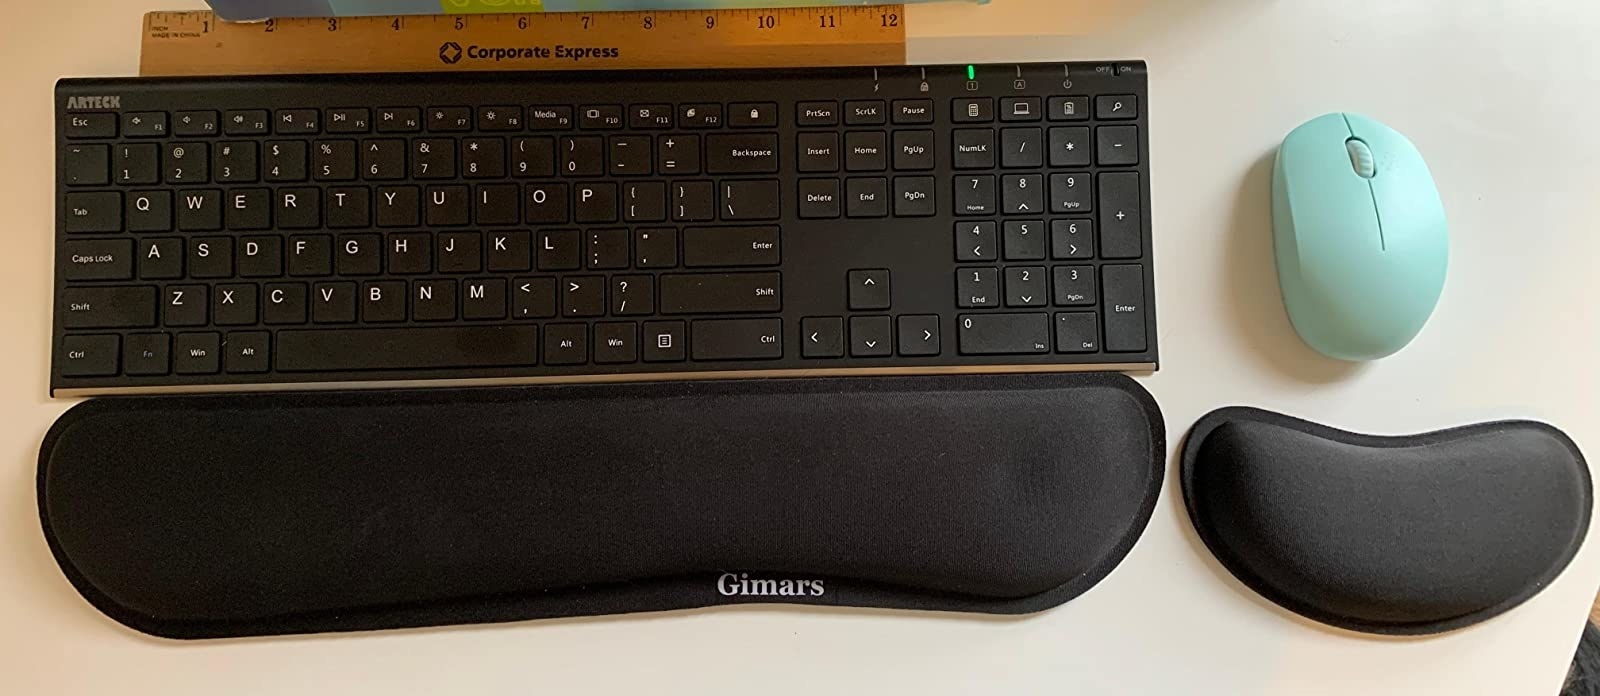 reviewer image of the gimars keyboard and mouse rest pads 